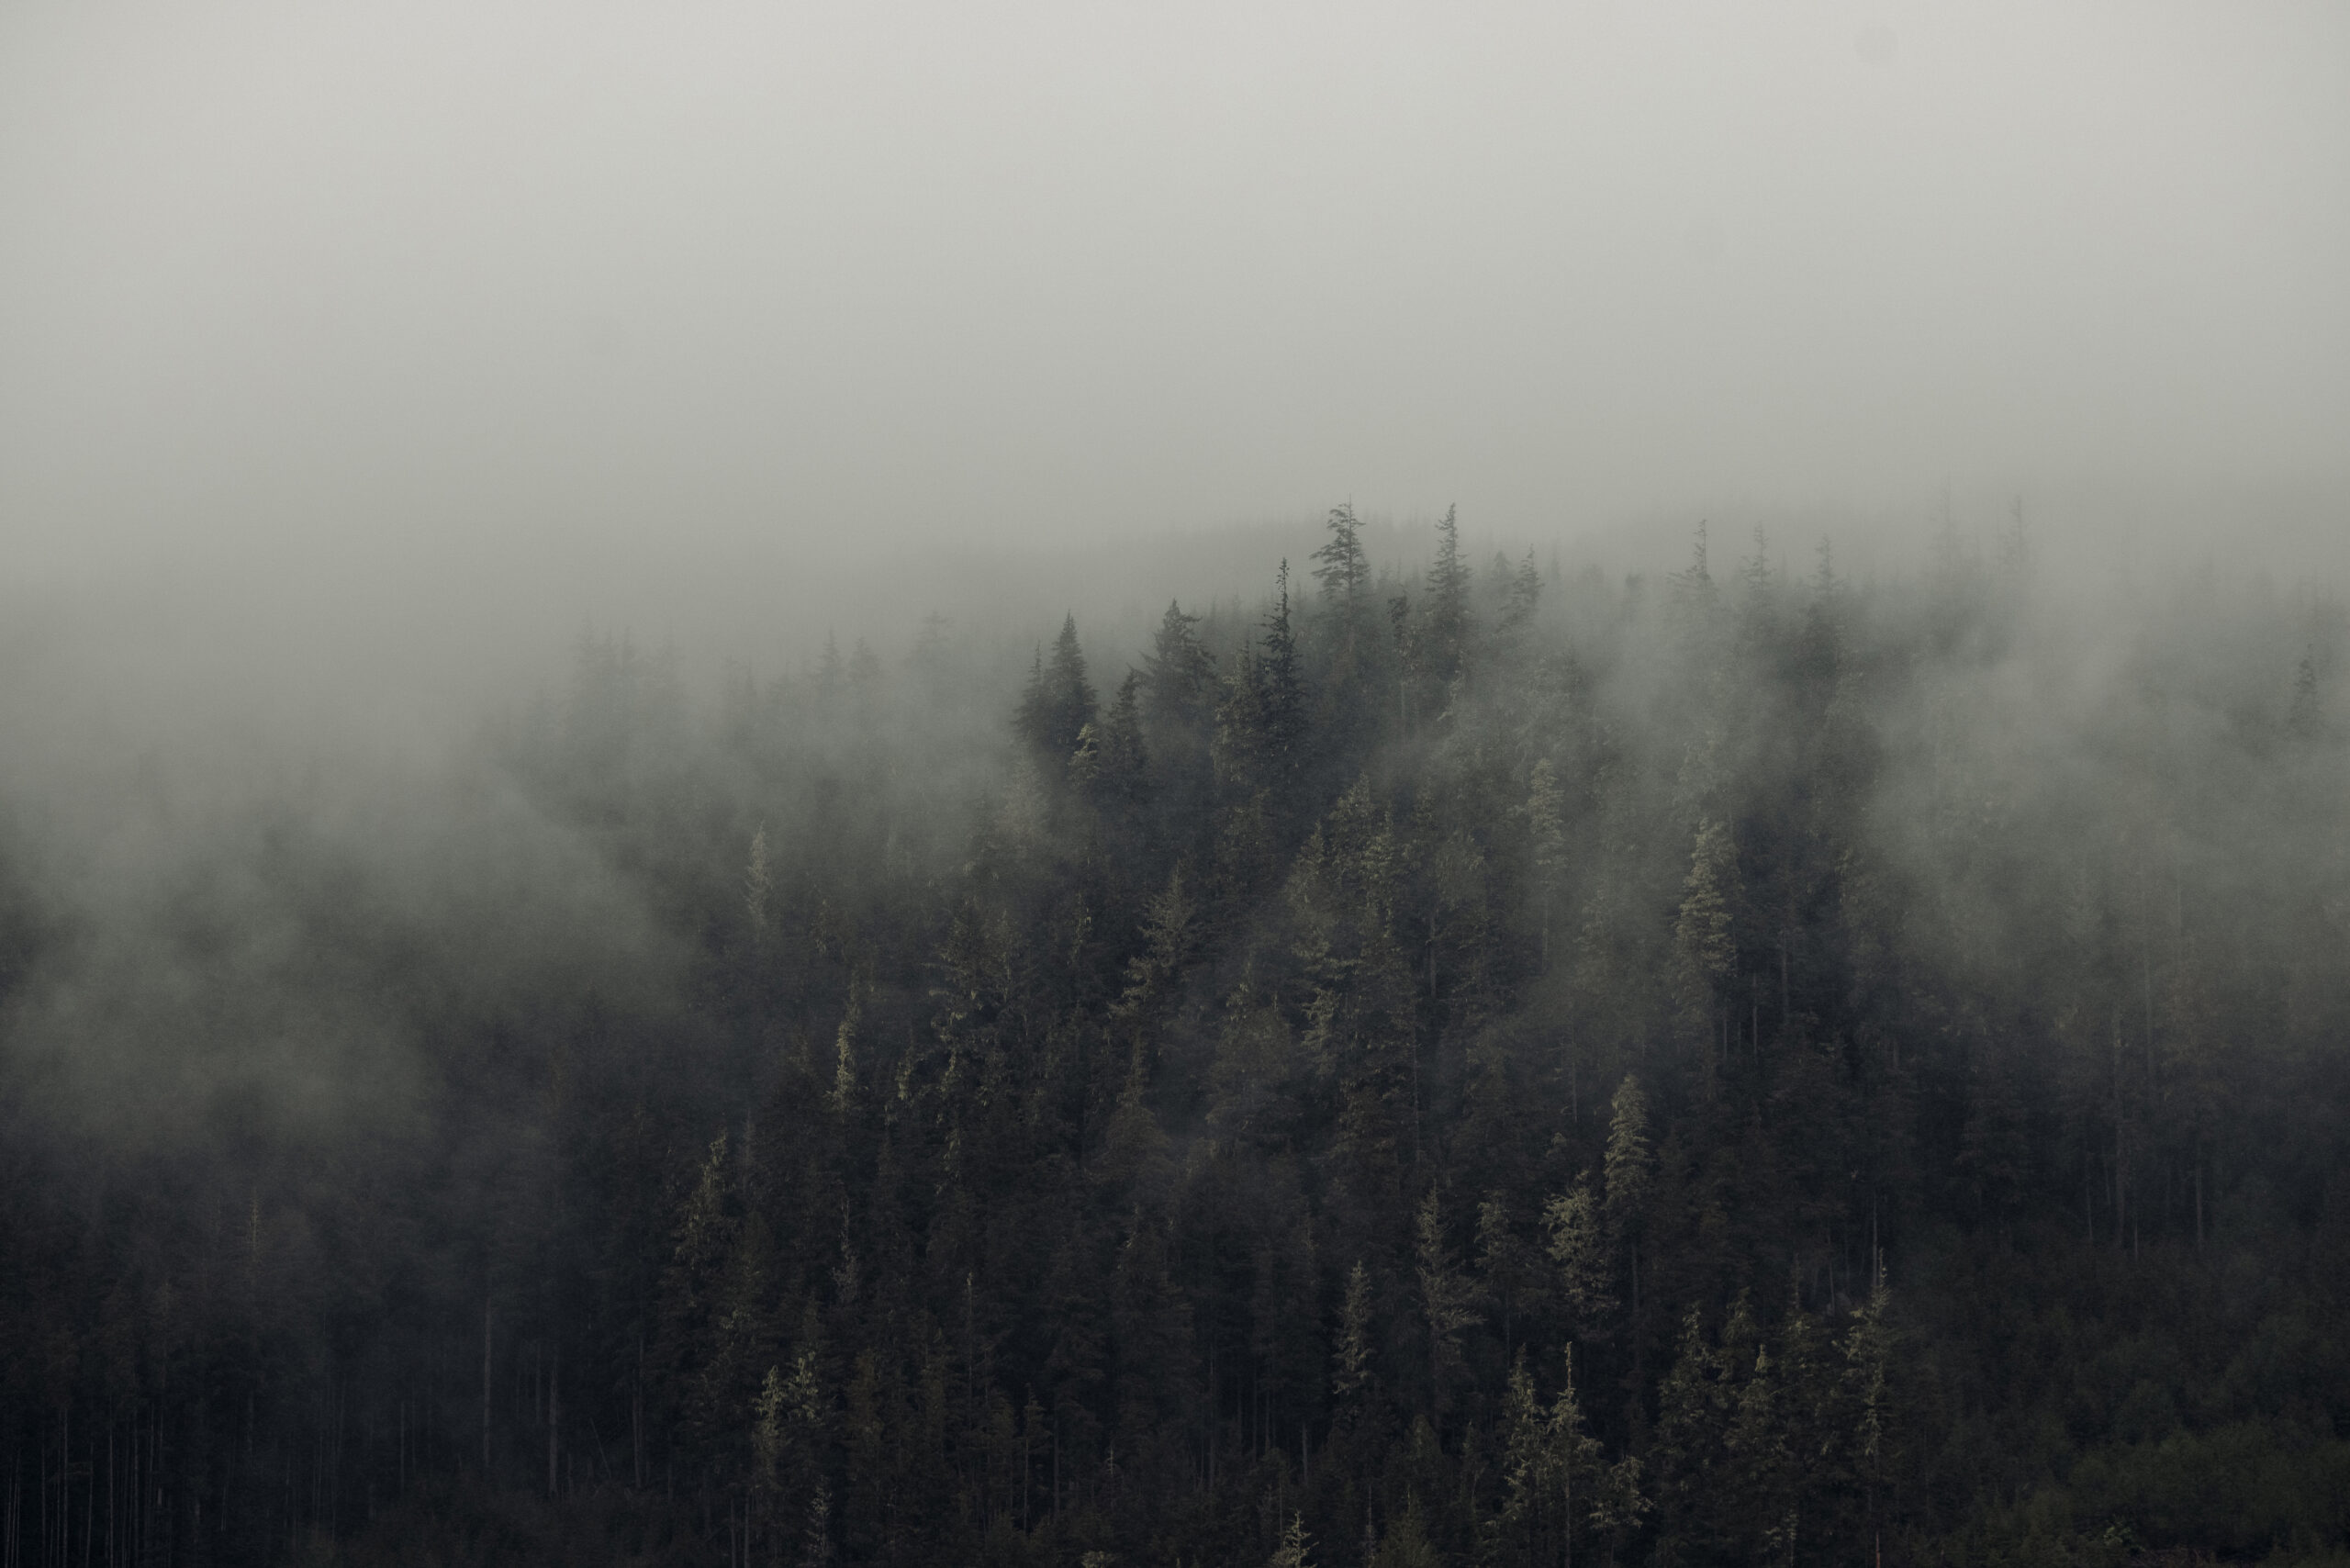 Mist hangs over trees in the southern range of the Great Bear Rainforest. Photo: Taylor Roades / The Narwhal